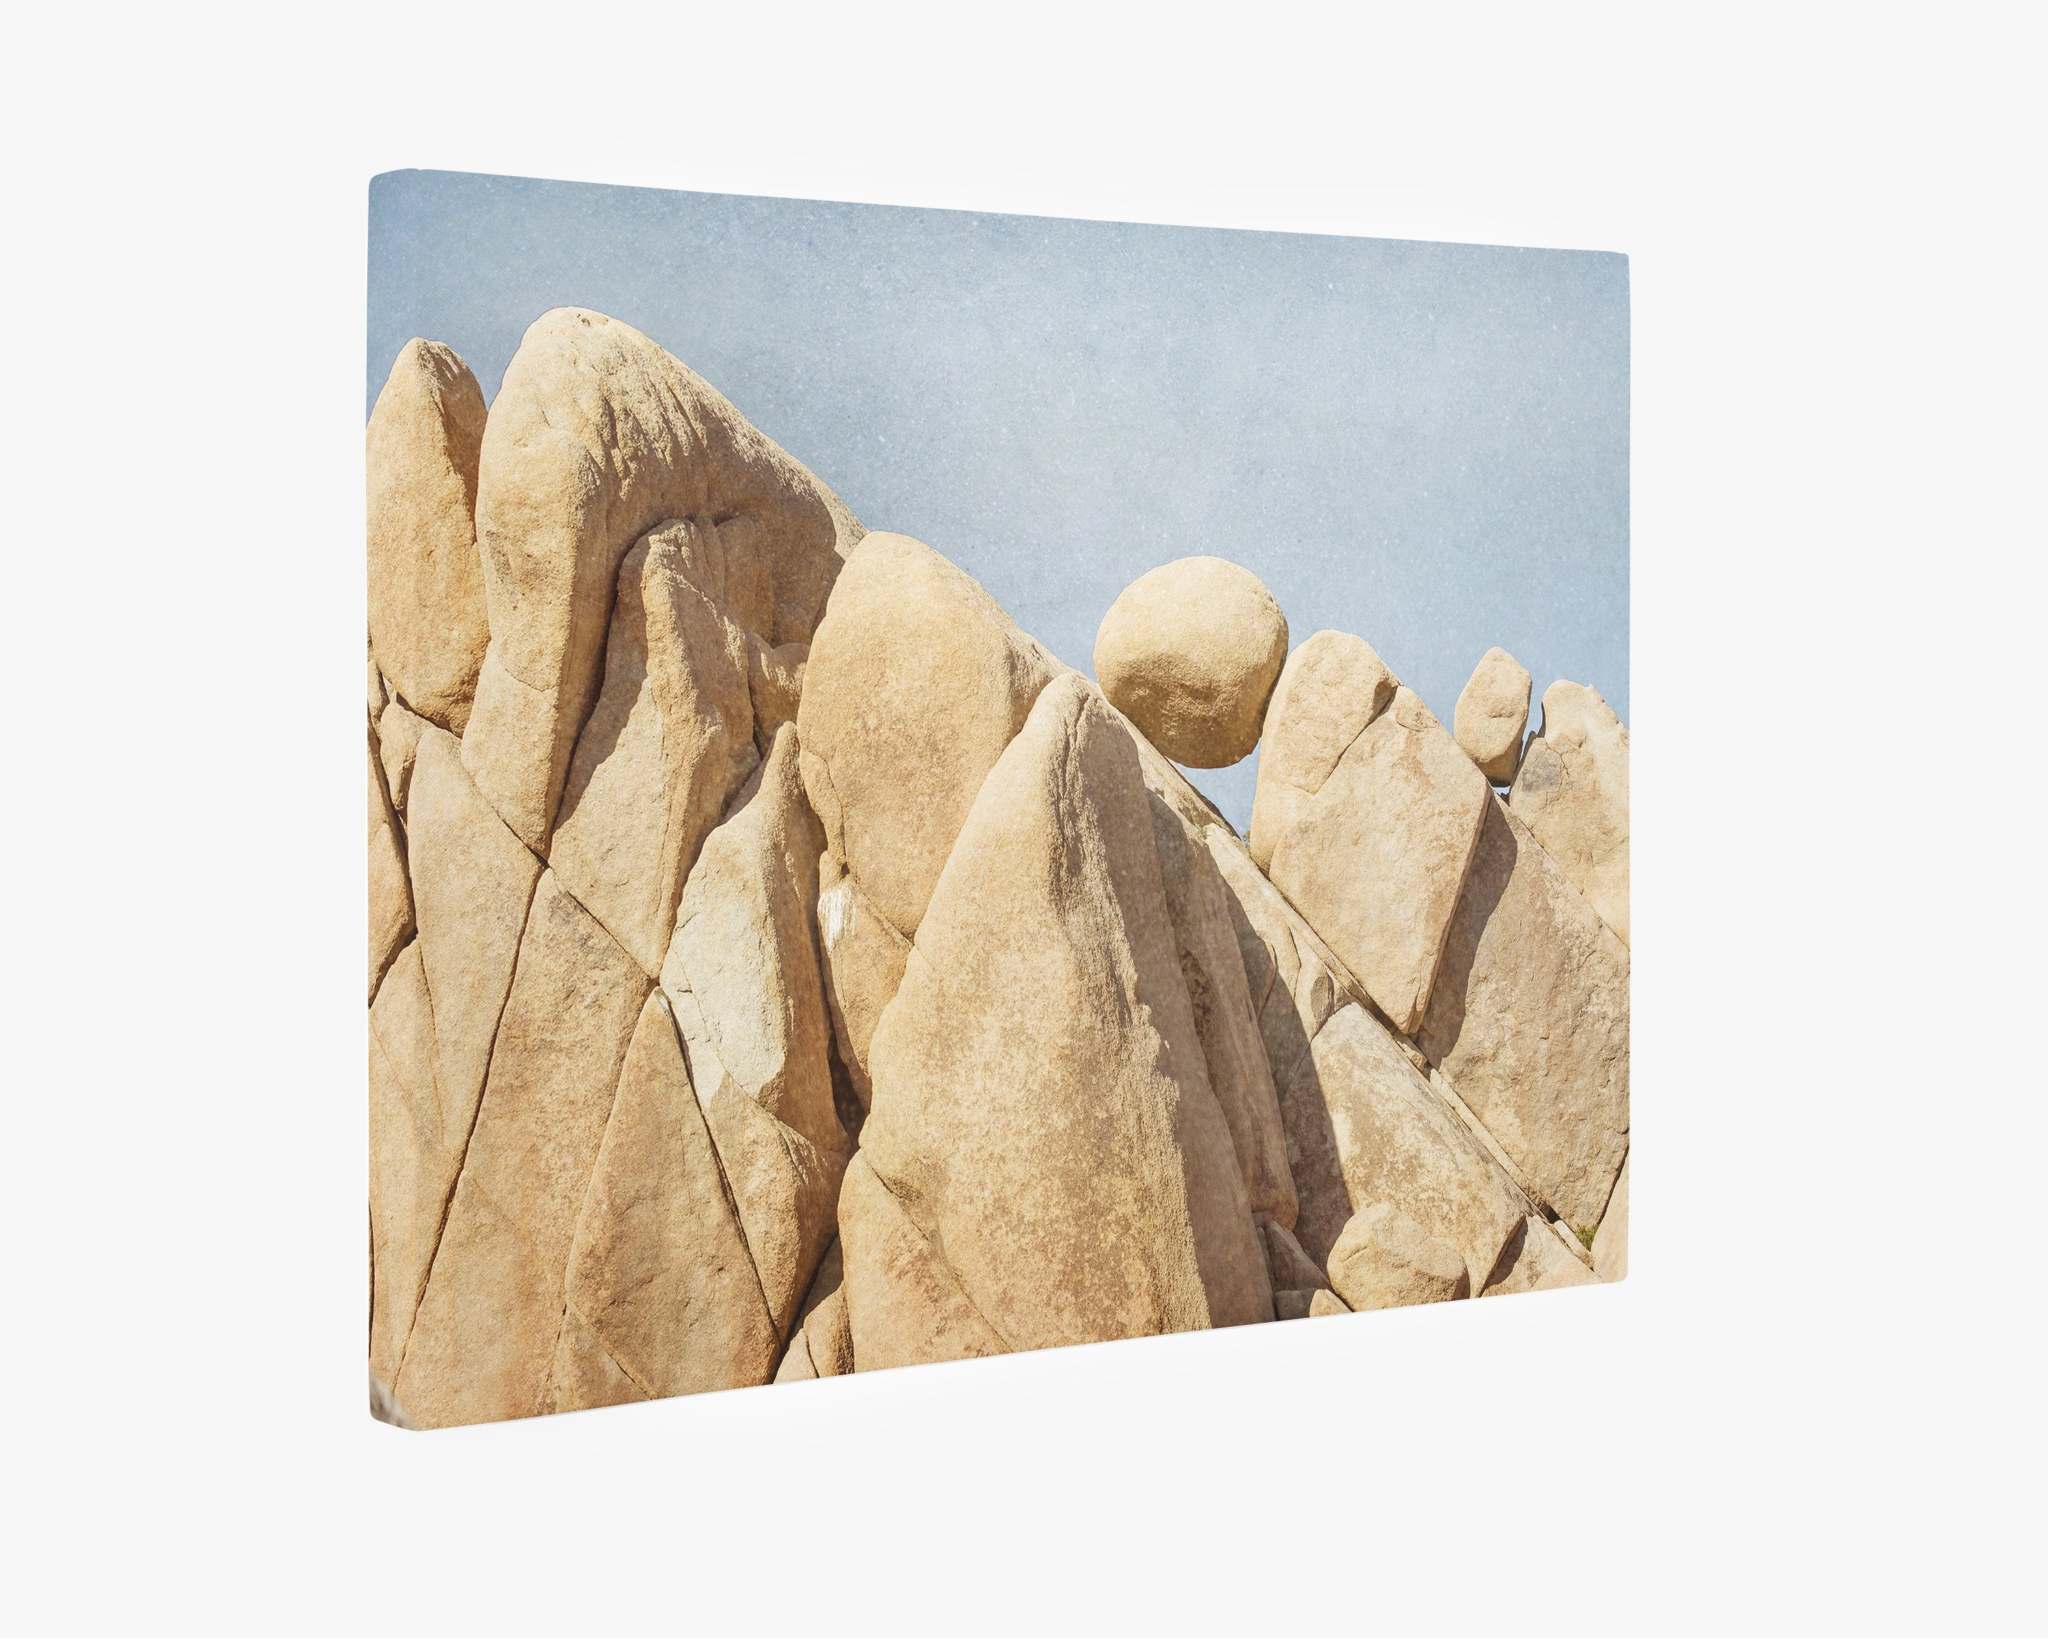 A rugged landscape of large, tan Joshua Tree desert rock formations under a clear blue sky. One round boulder appears to be precariously balanced atop a pointed rock. The natural scene conveys a sense of tranquility and geological wonder, perfect for Offley Green's Joshua Tree Canvas Wall Art, 'Rock Formations,' reflecting nature's beauty.